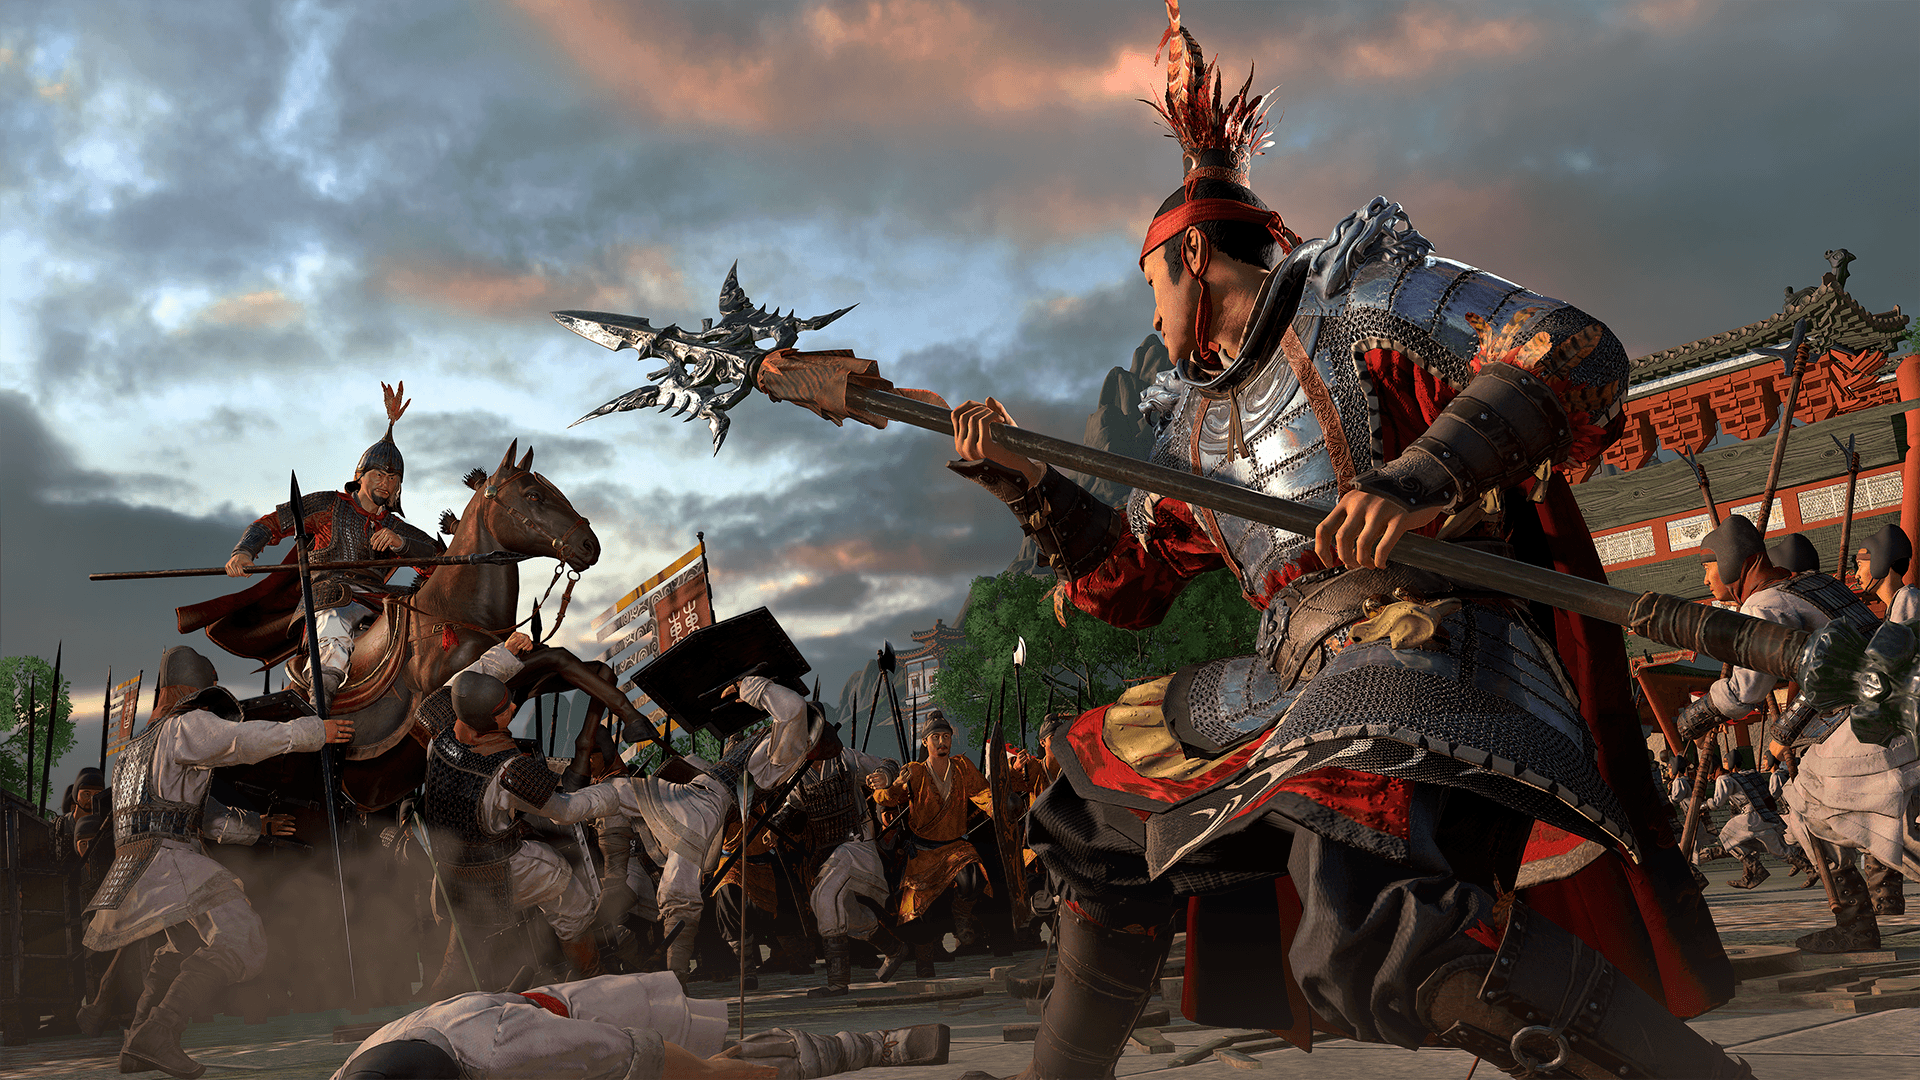 What has Total War: Three Kingdoms learnt from Total War: Warhammer